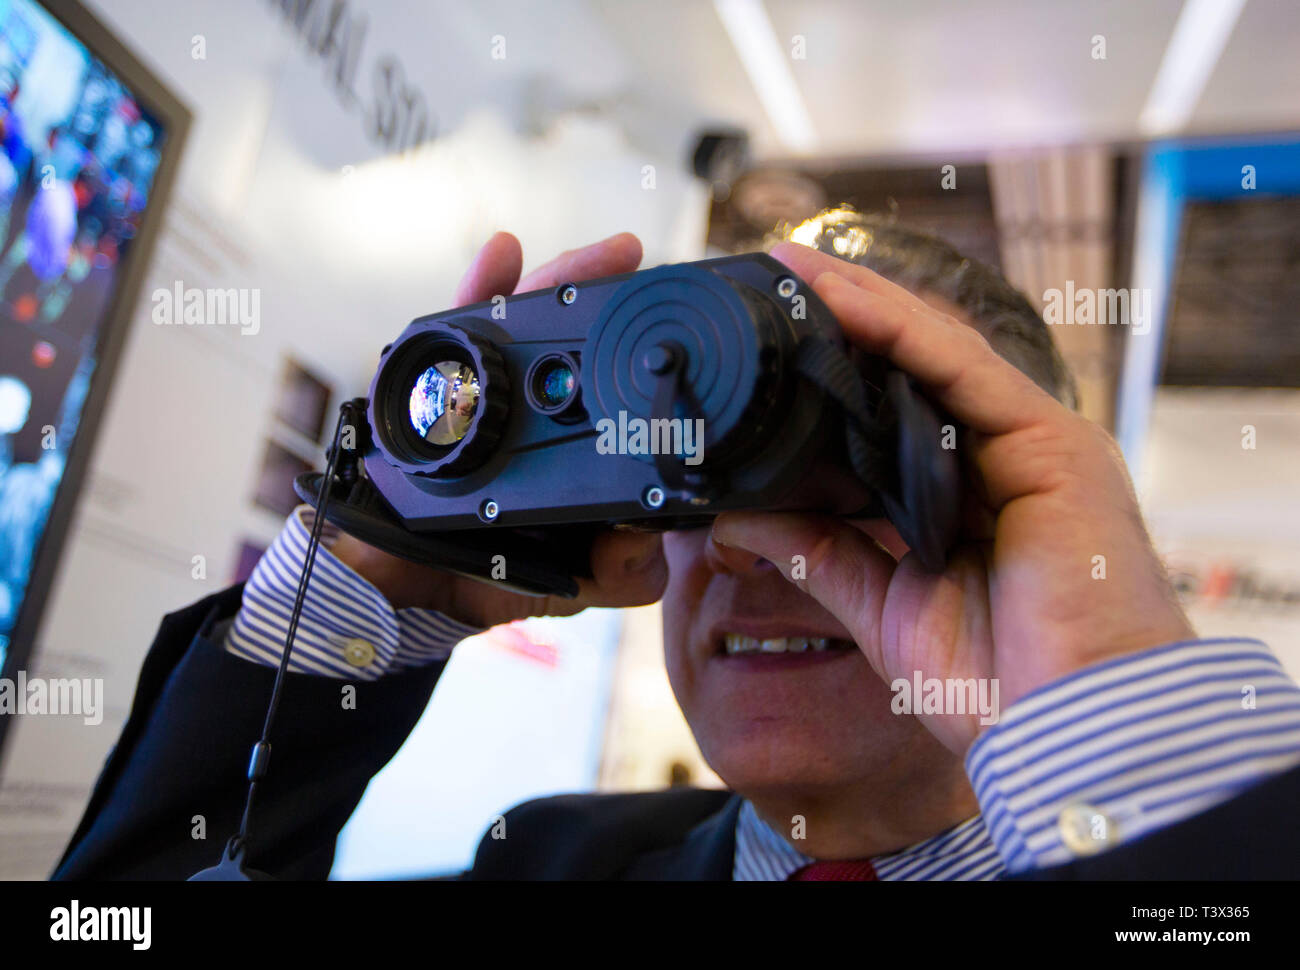 (190412) -- LAS VEGAS, April 12, 2019 (Xinhua) -- A staff member of China's Hikvision shows a thermal-optical binocular camera at the International Security Conference and Exposition (ISC West) in Las Vegas, the United States, April 10, 2019. Chinese security companies are seeking more trade opportunities in the American market at the ongoing International Security Conference and Exposition here. A total of 154 Chinese companies, from sectors including surveillance, smart homes, access control and border security, are participating in the annual show from Wednesday to Friday, the largest secur Stock Photo